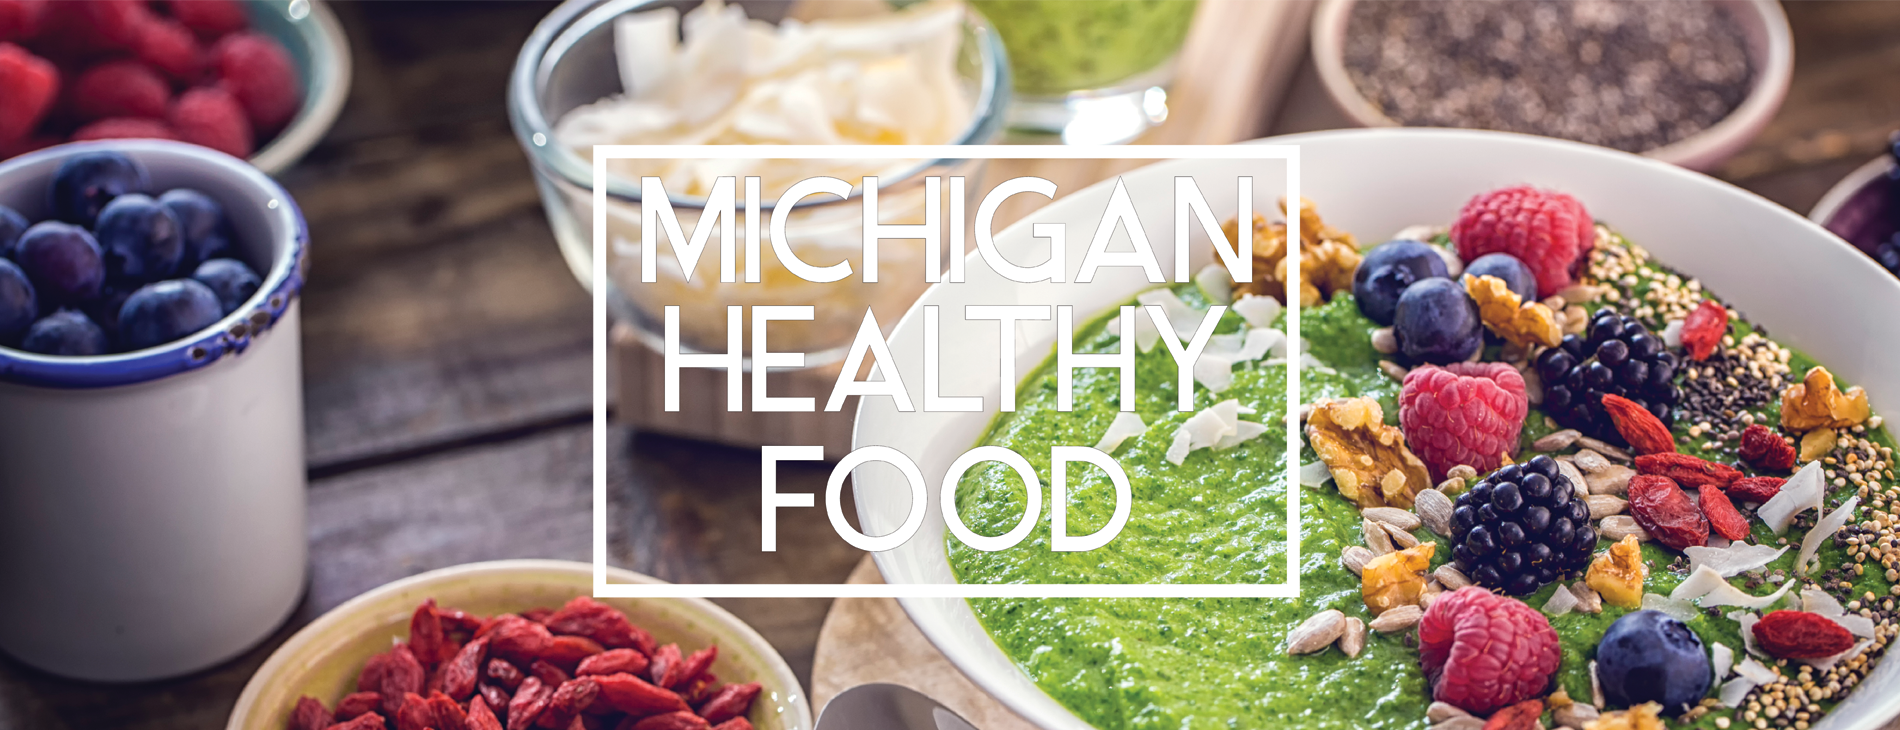 Michigan Healthy Food About Us